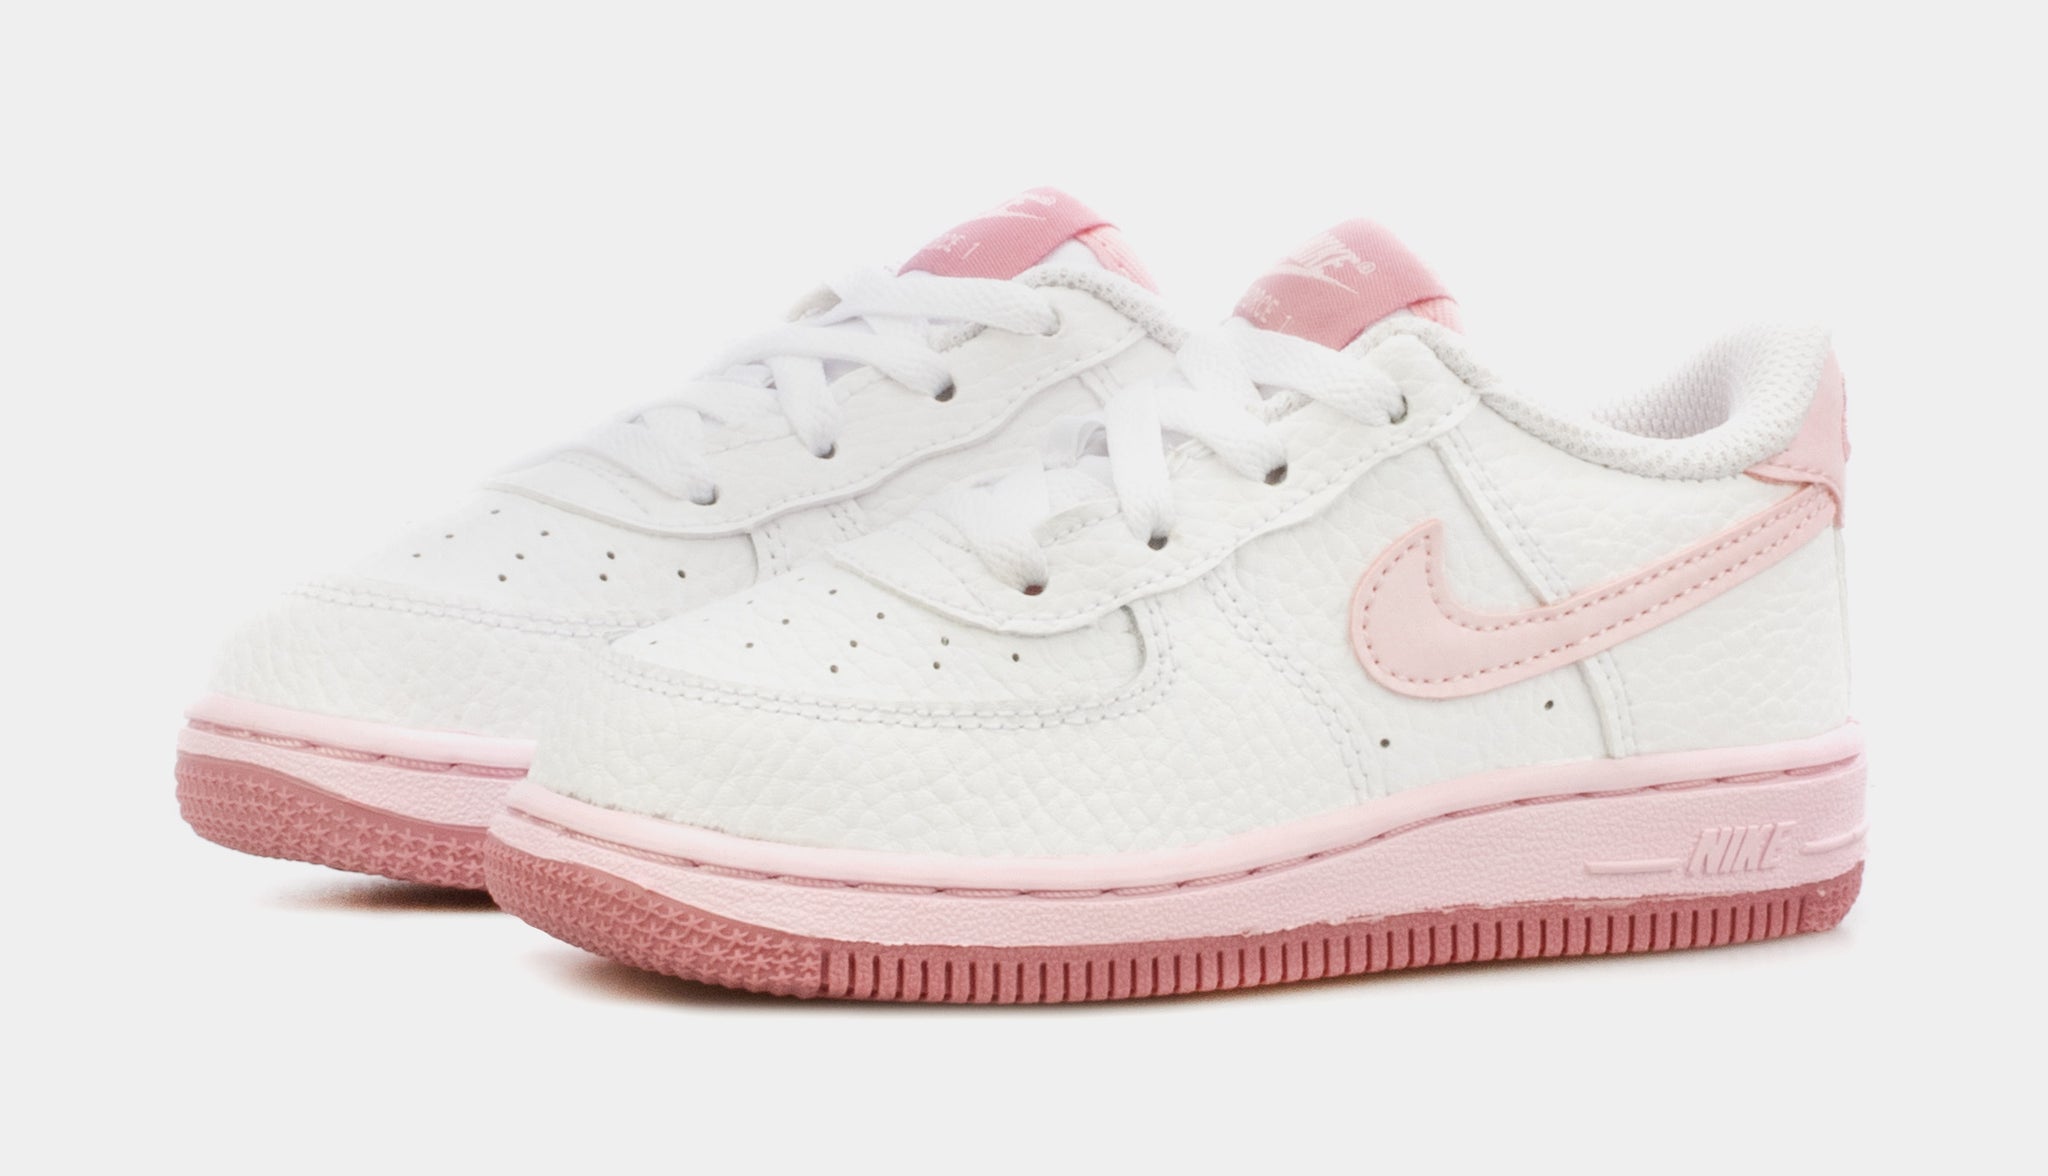 Nike Force 1 Low Baby/Toddler Shoes.